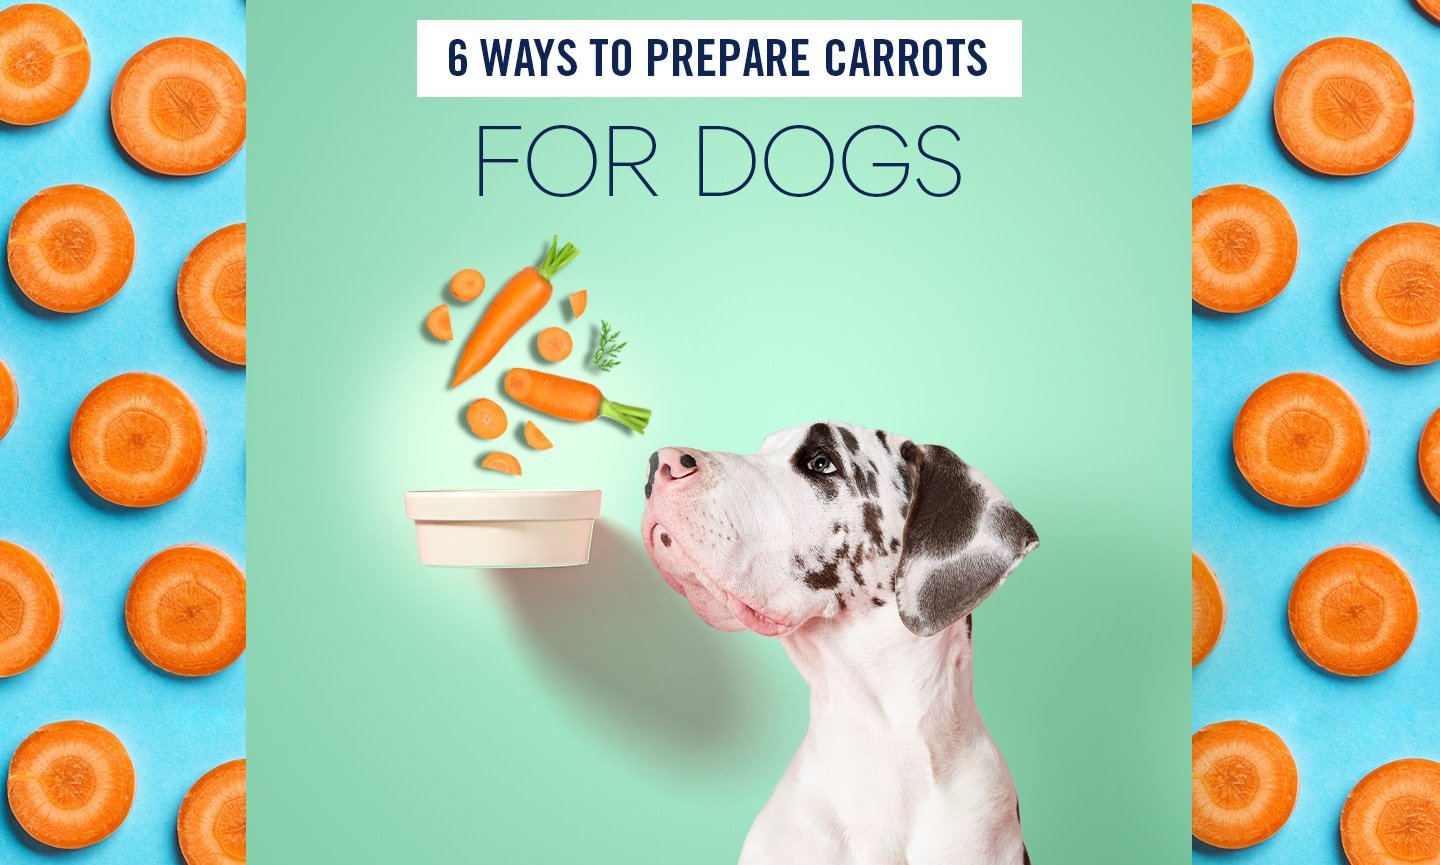 Can Dogs Eat Carrots? Yes They Can!